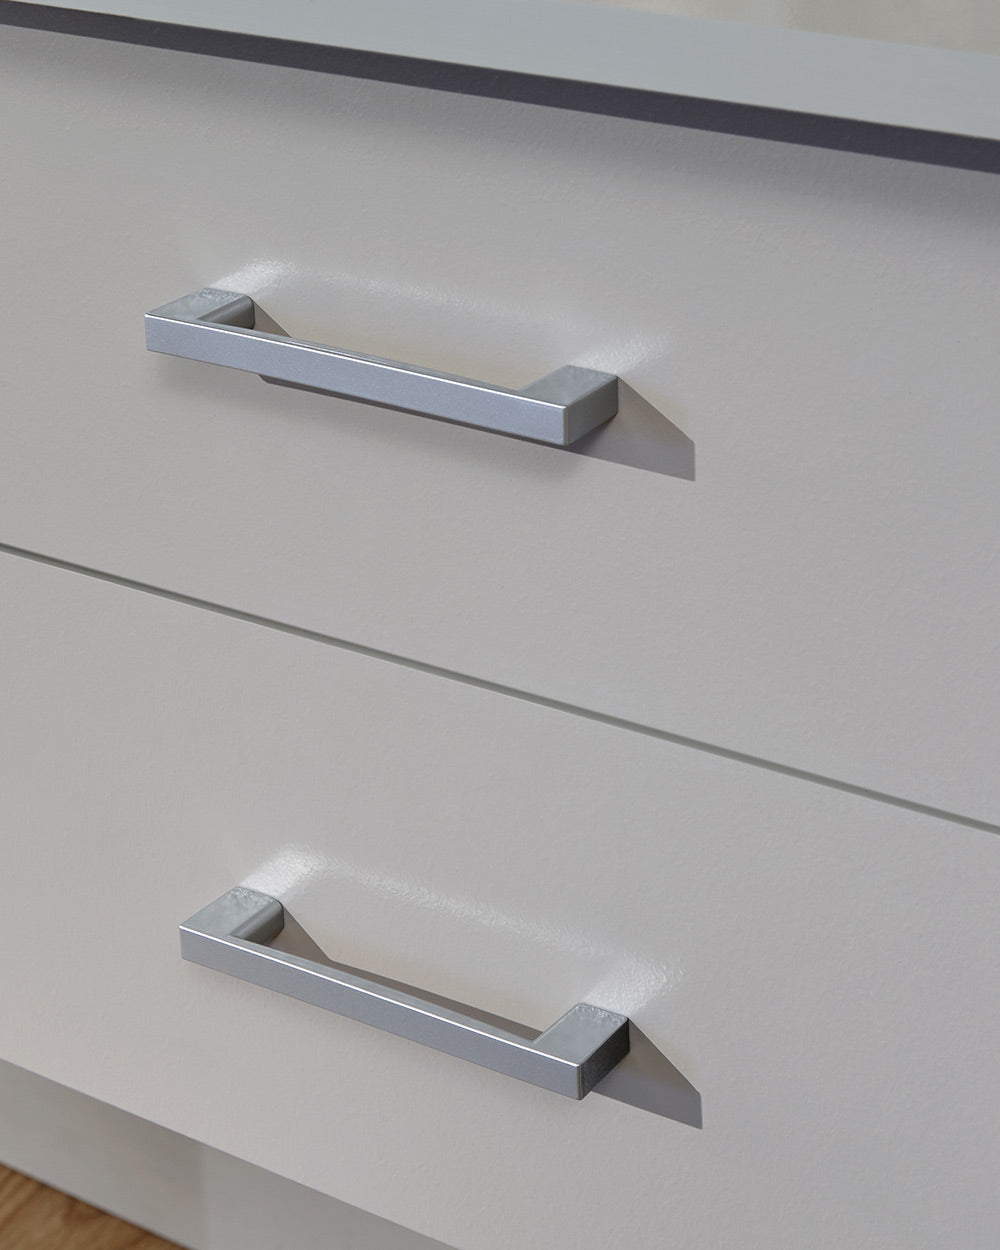 Panama desk in grey in a lifestyle photo in a room close up of the handles